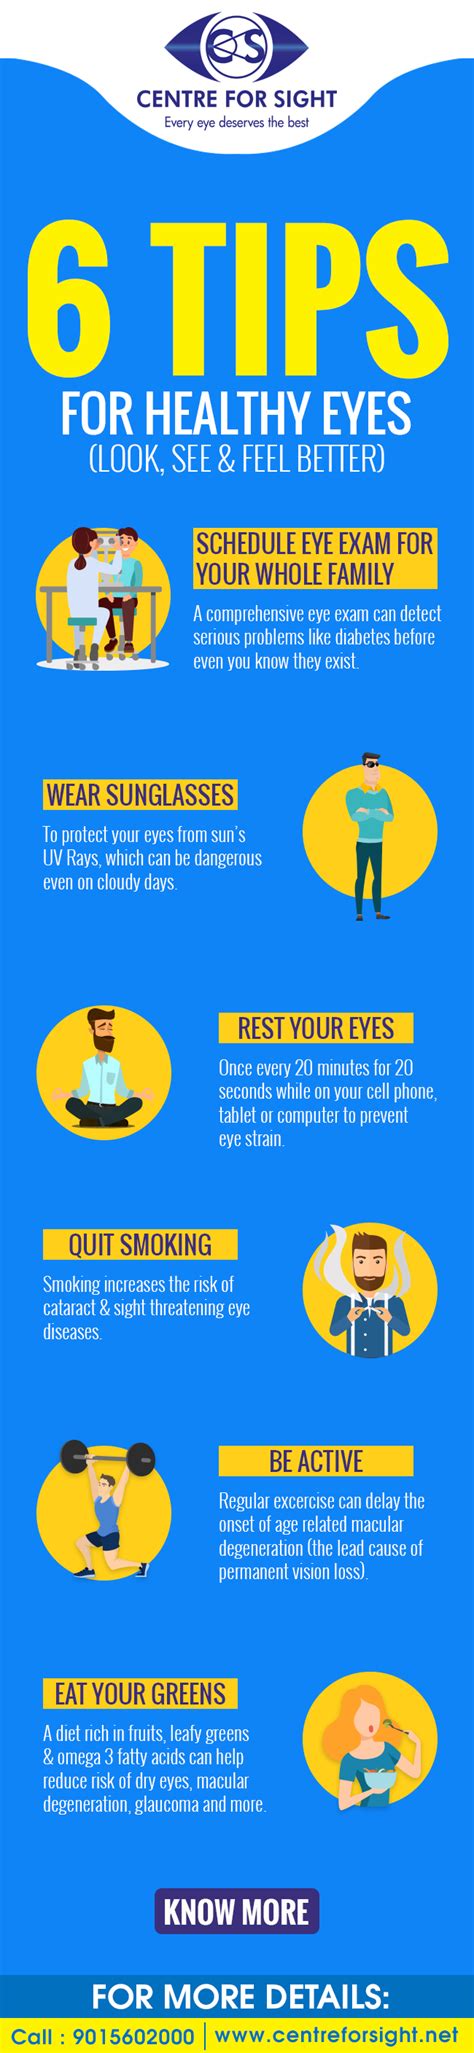 6 Tips For Healthy Eyes Infographic